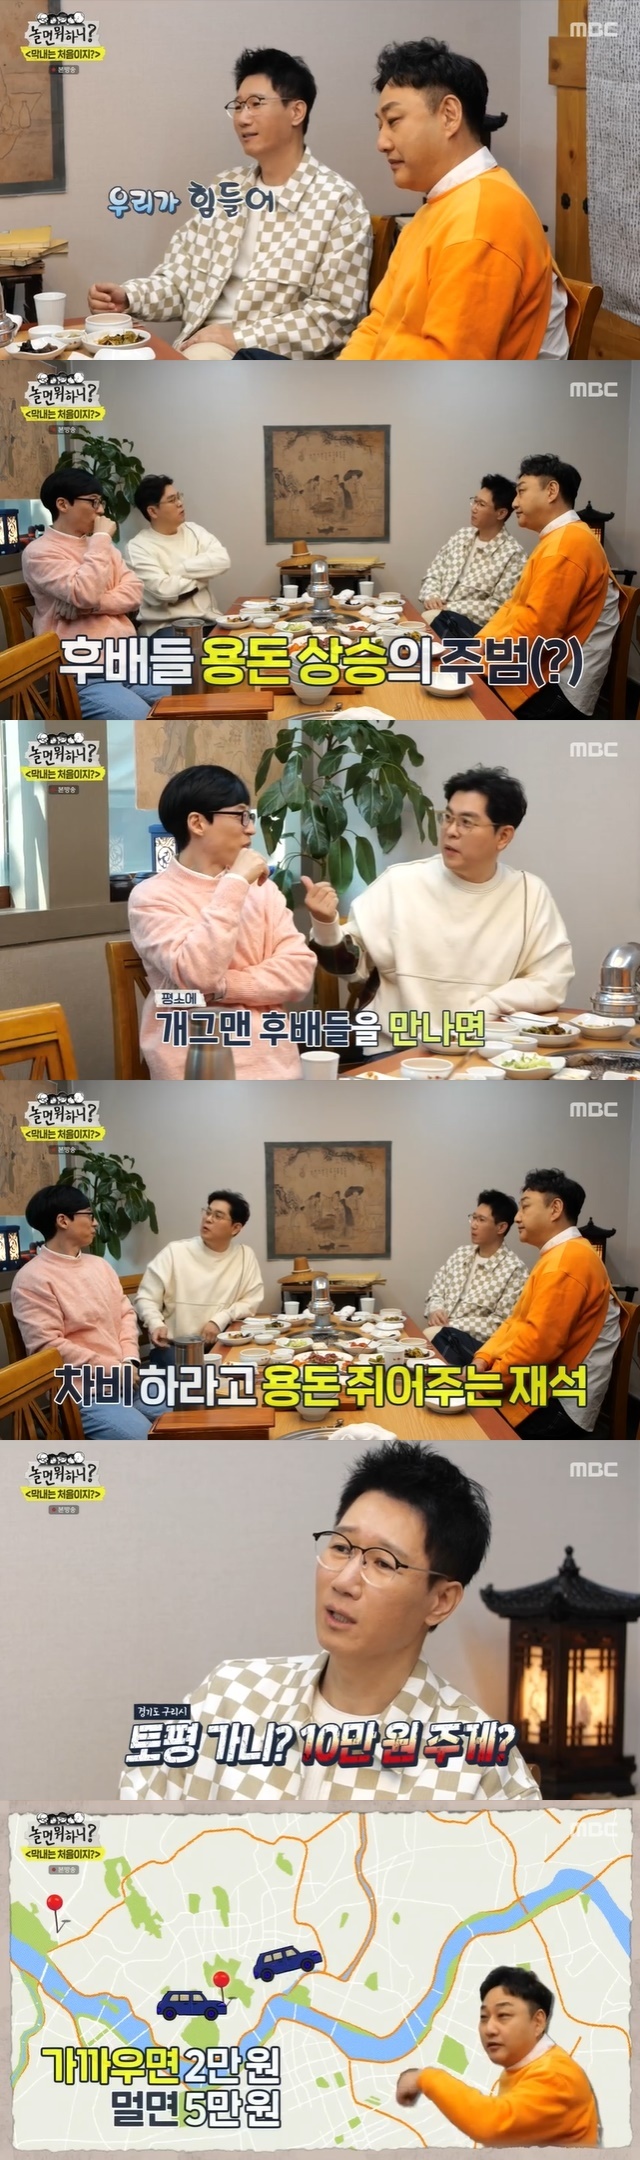 Yoo Jae-Suks mid-tense was heard with Ji Suk-jins joke-blue complaint.In the 126th MBC entertainment Hangout with Yo (hereinafter referred to as What to Play) broadcast on February 26, a meeting of Cho Dong-Ari members Yoo Jae-Suk, Kim Yong-man, Ji Suk-jin and Kim Soo-yong was drawn.Youre not burdened, the teams brothers told Yoo Jae-Suk, come out today. No. Im a piece of crap.Kim Soo-yong told Yoo Jae-Suk, You have become so good, and I did not have a cheapness in the old days.Ji Suk-jin complained to Yoo Jae-Suk, Give your juniors moderately when they give you pocket money sometimes, we are tough, if you raise the amount.The amount of money Yoo Jae-Suk gives his juniors as pocket money was revealed through Ji Suk-jin, who usually gives 100,000 won for chabi; Ji Suk-jin said, Topyeong Ghanya.Give me 100,000 won. Give me 50,000 won.